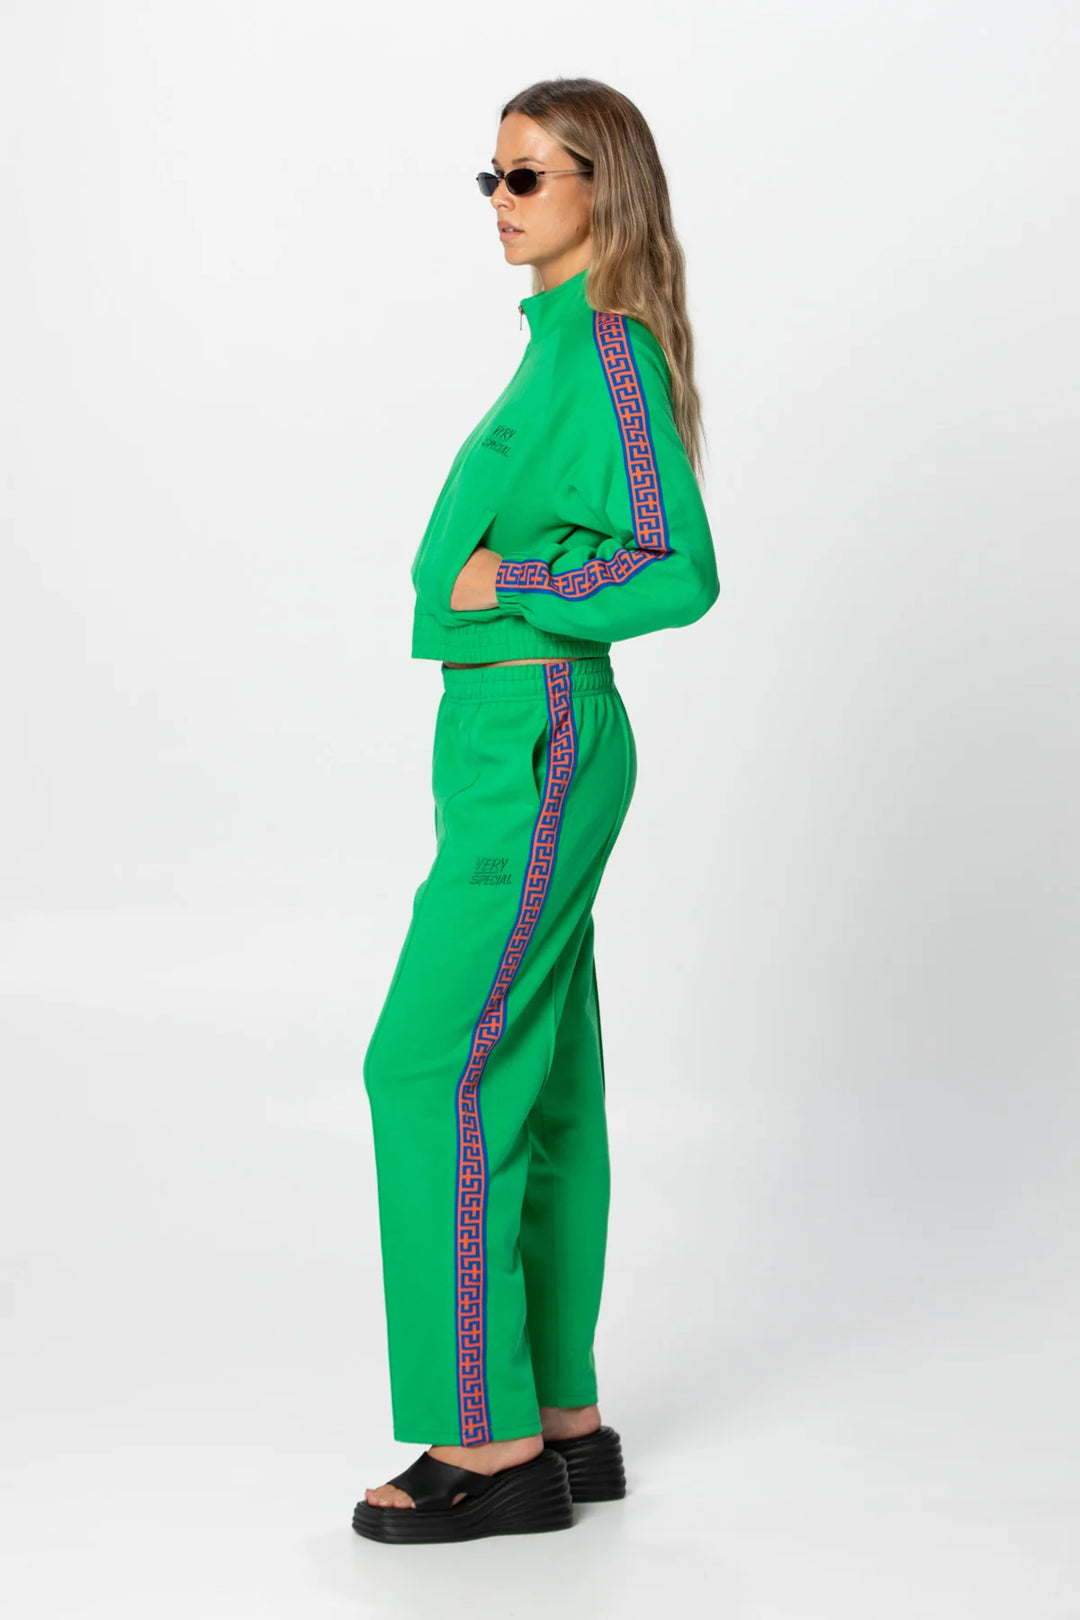 Something Very Special - Geo Track Jacket - Kelly Green